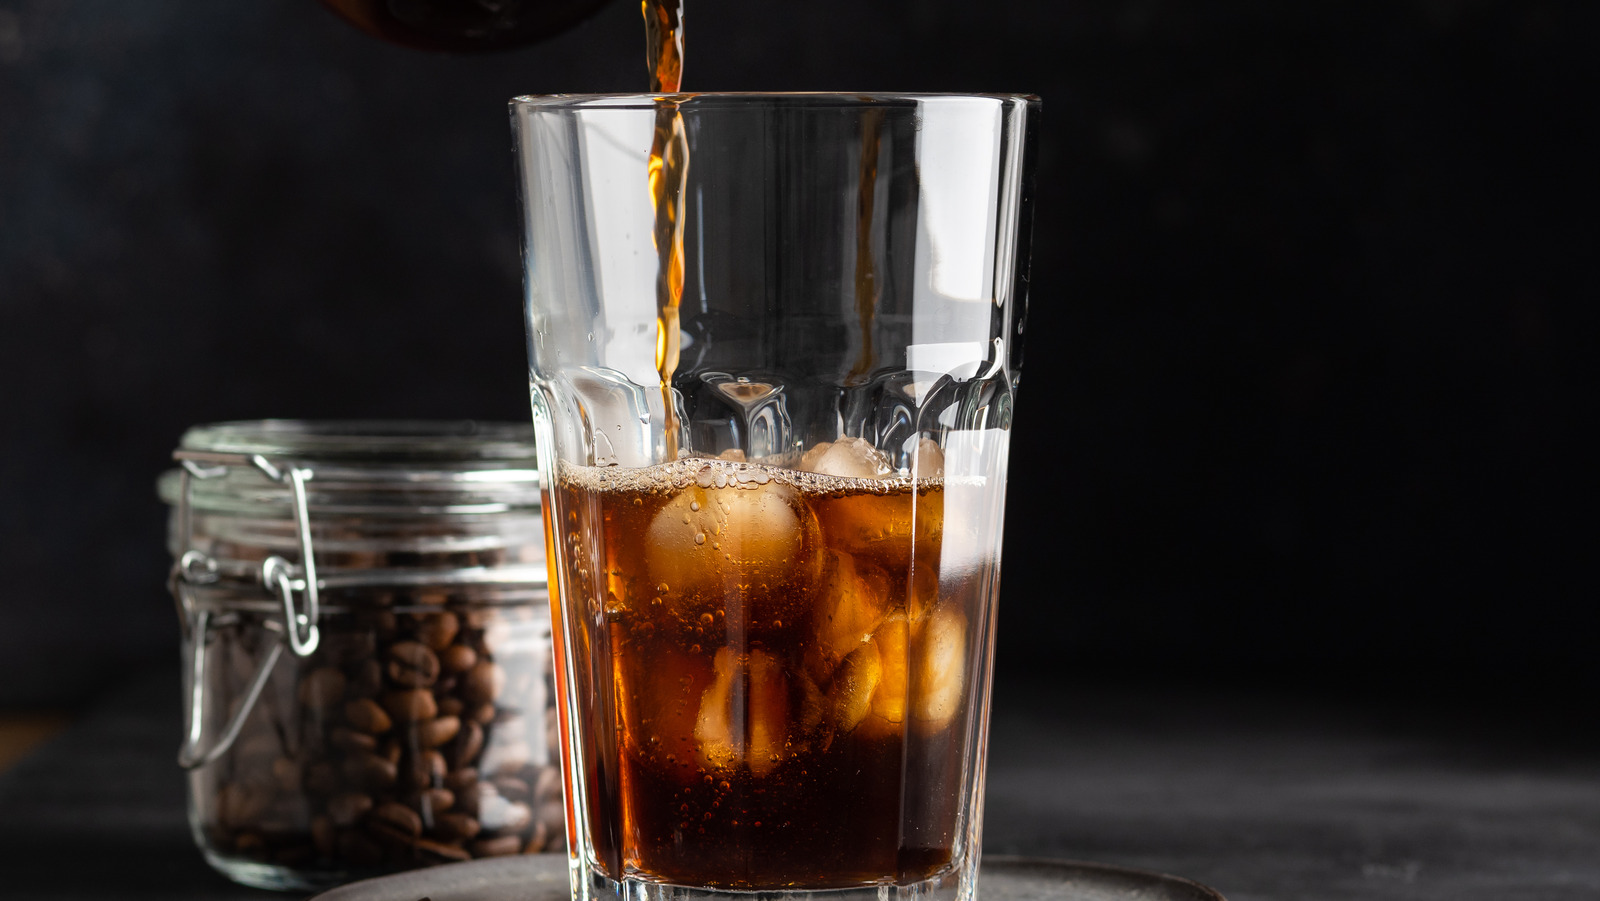 https://www.tastingtable.com/img/gallery/can-leaving-cold-brew-coffee-out-at-room-temperature-make-you-sick/l-intro-1661378789.jpg